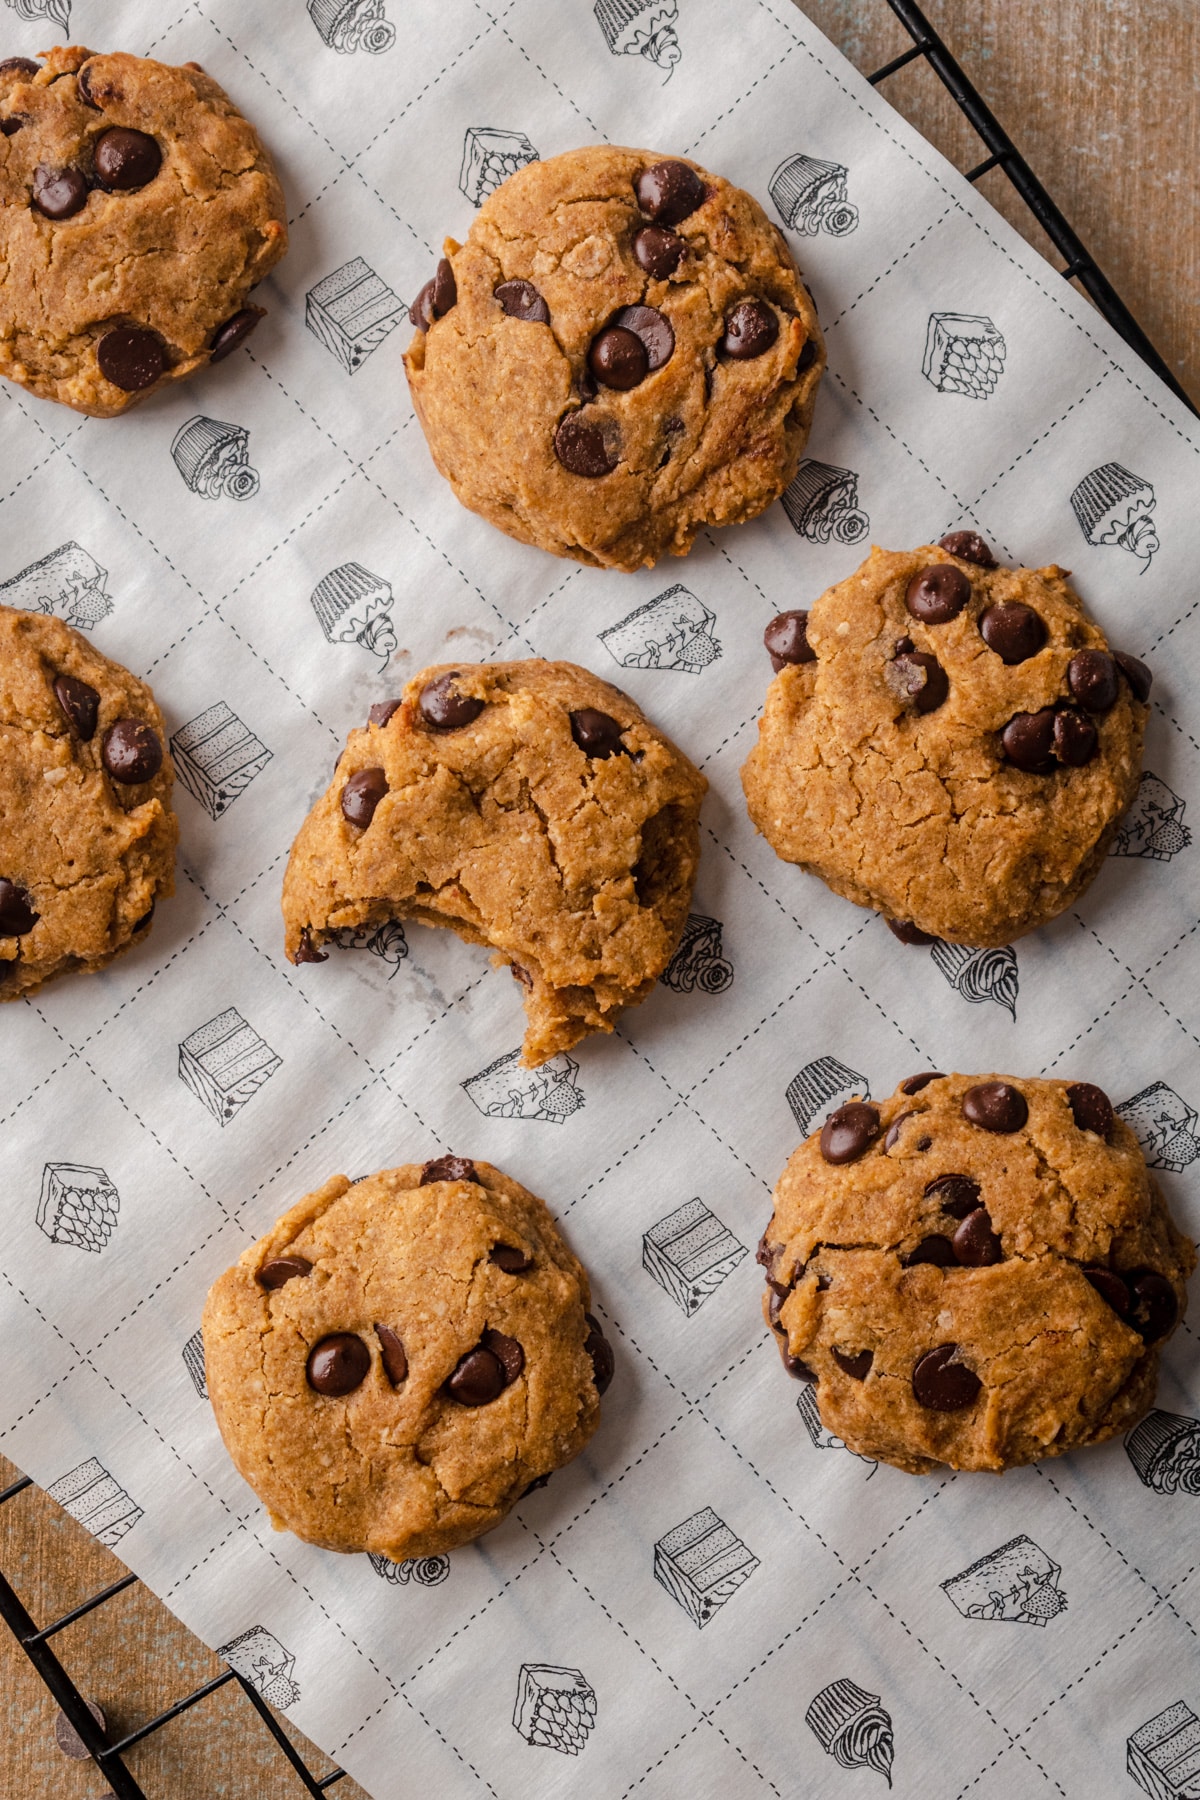 Several pumpkin chocolate chip cookies on parchment paper.